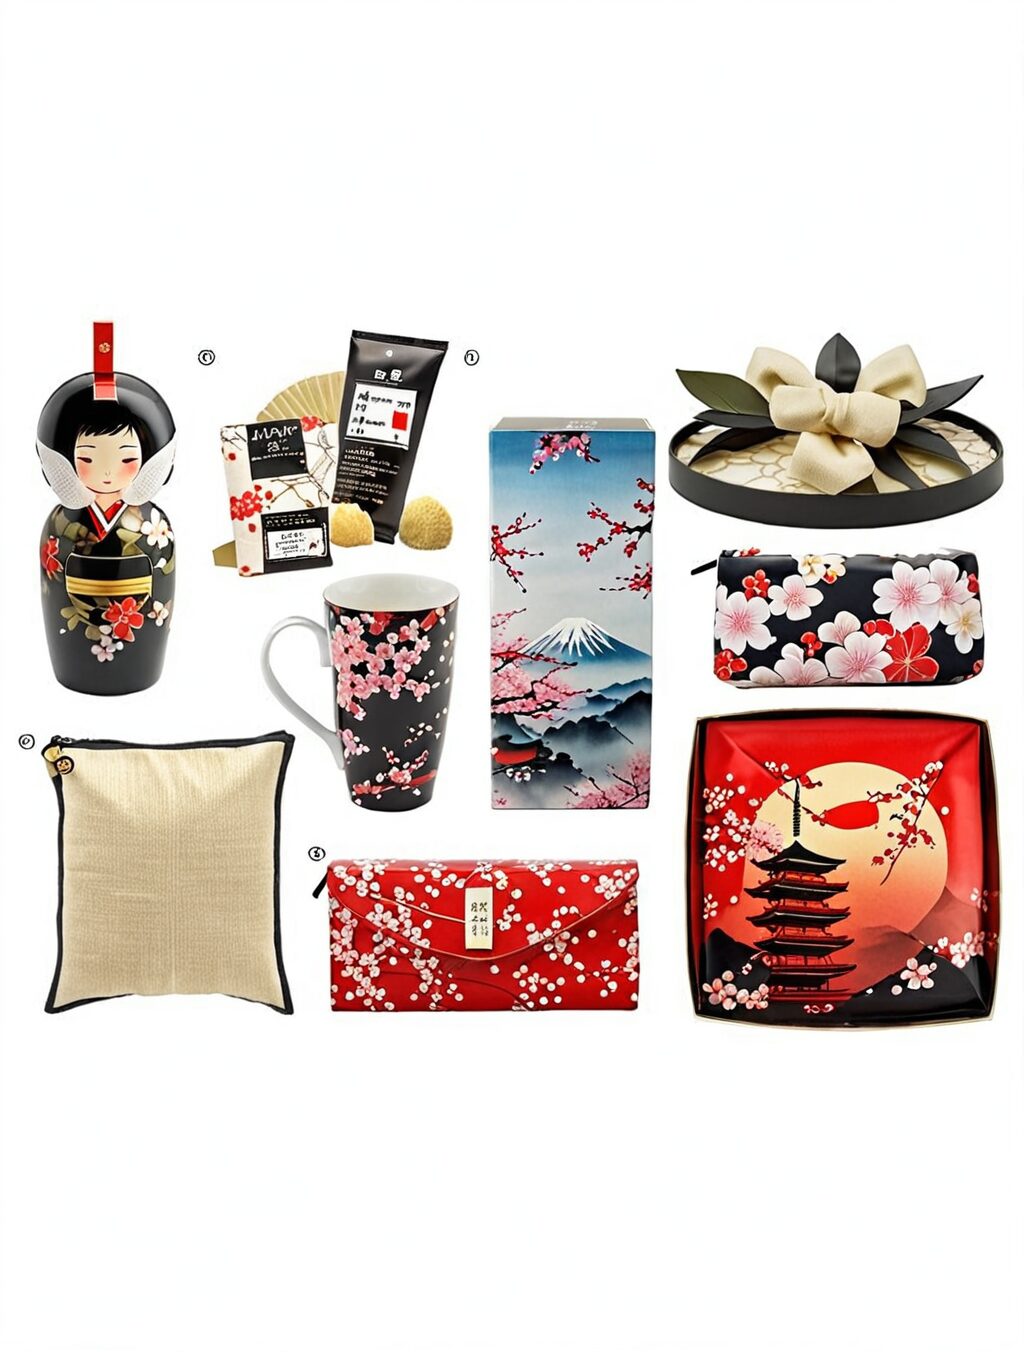 japan gifts for her